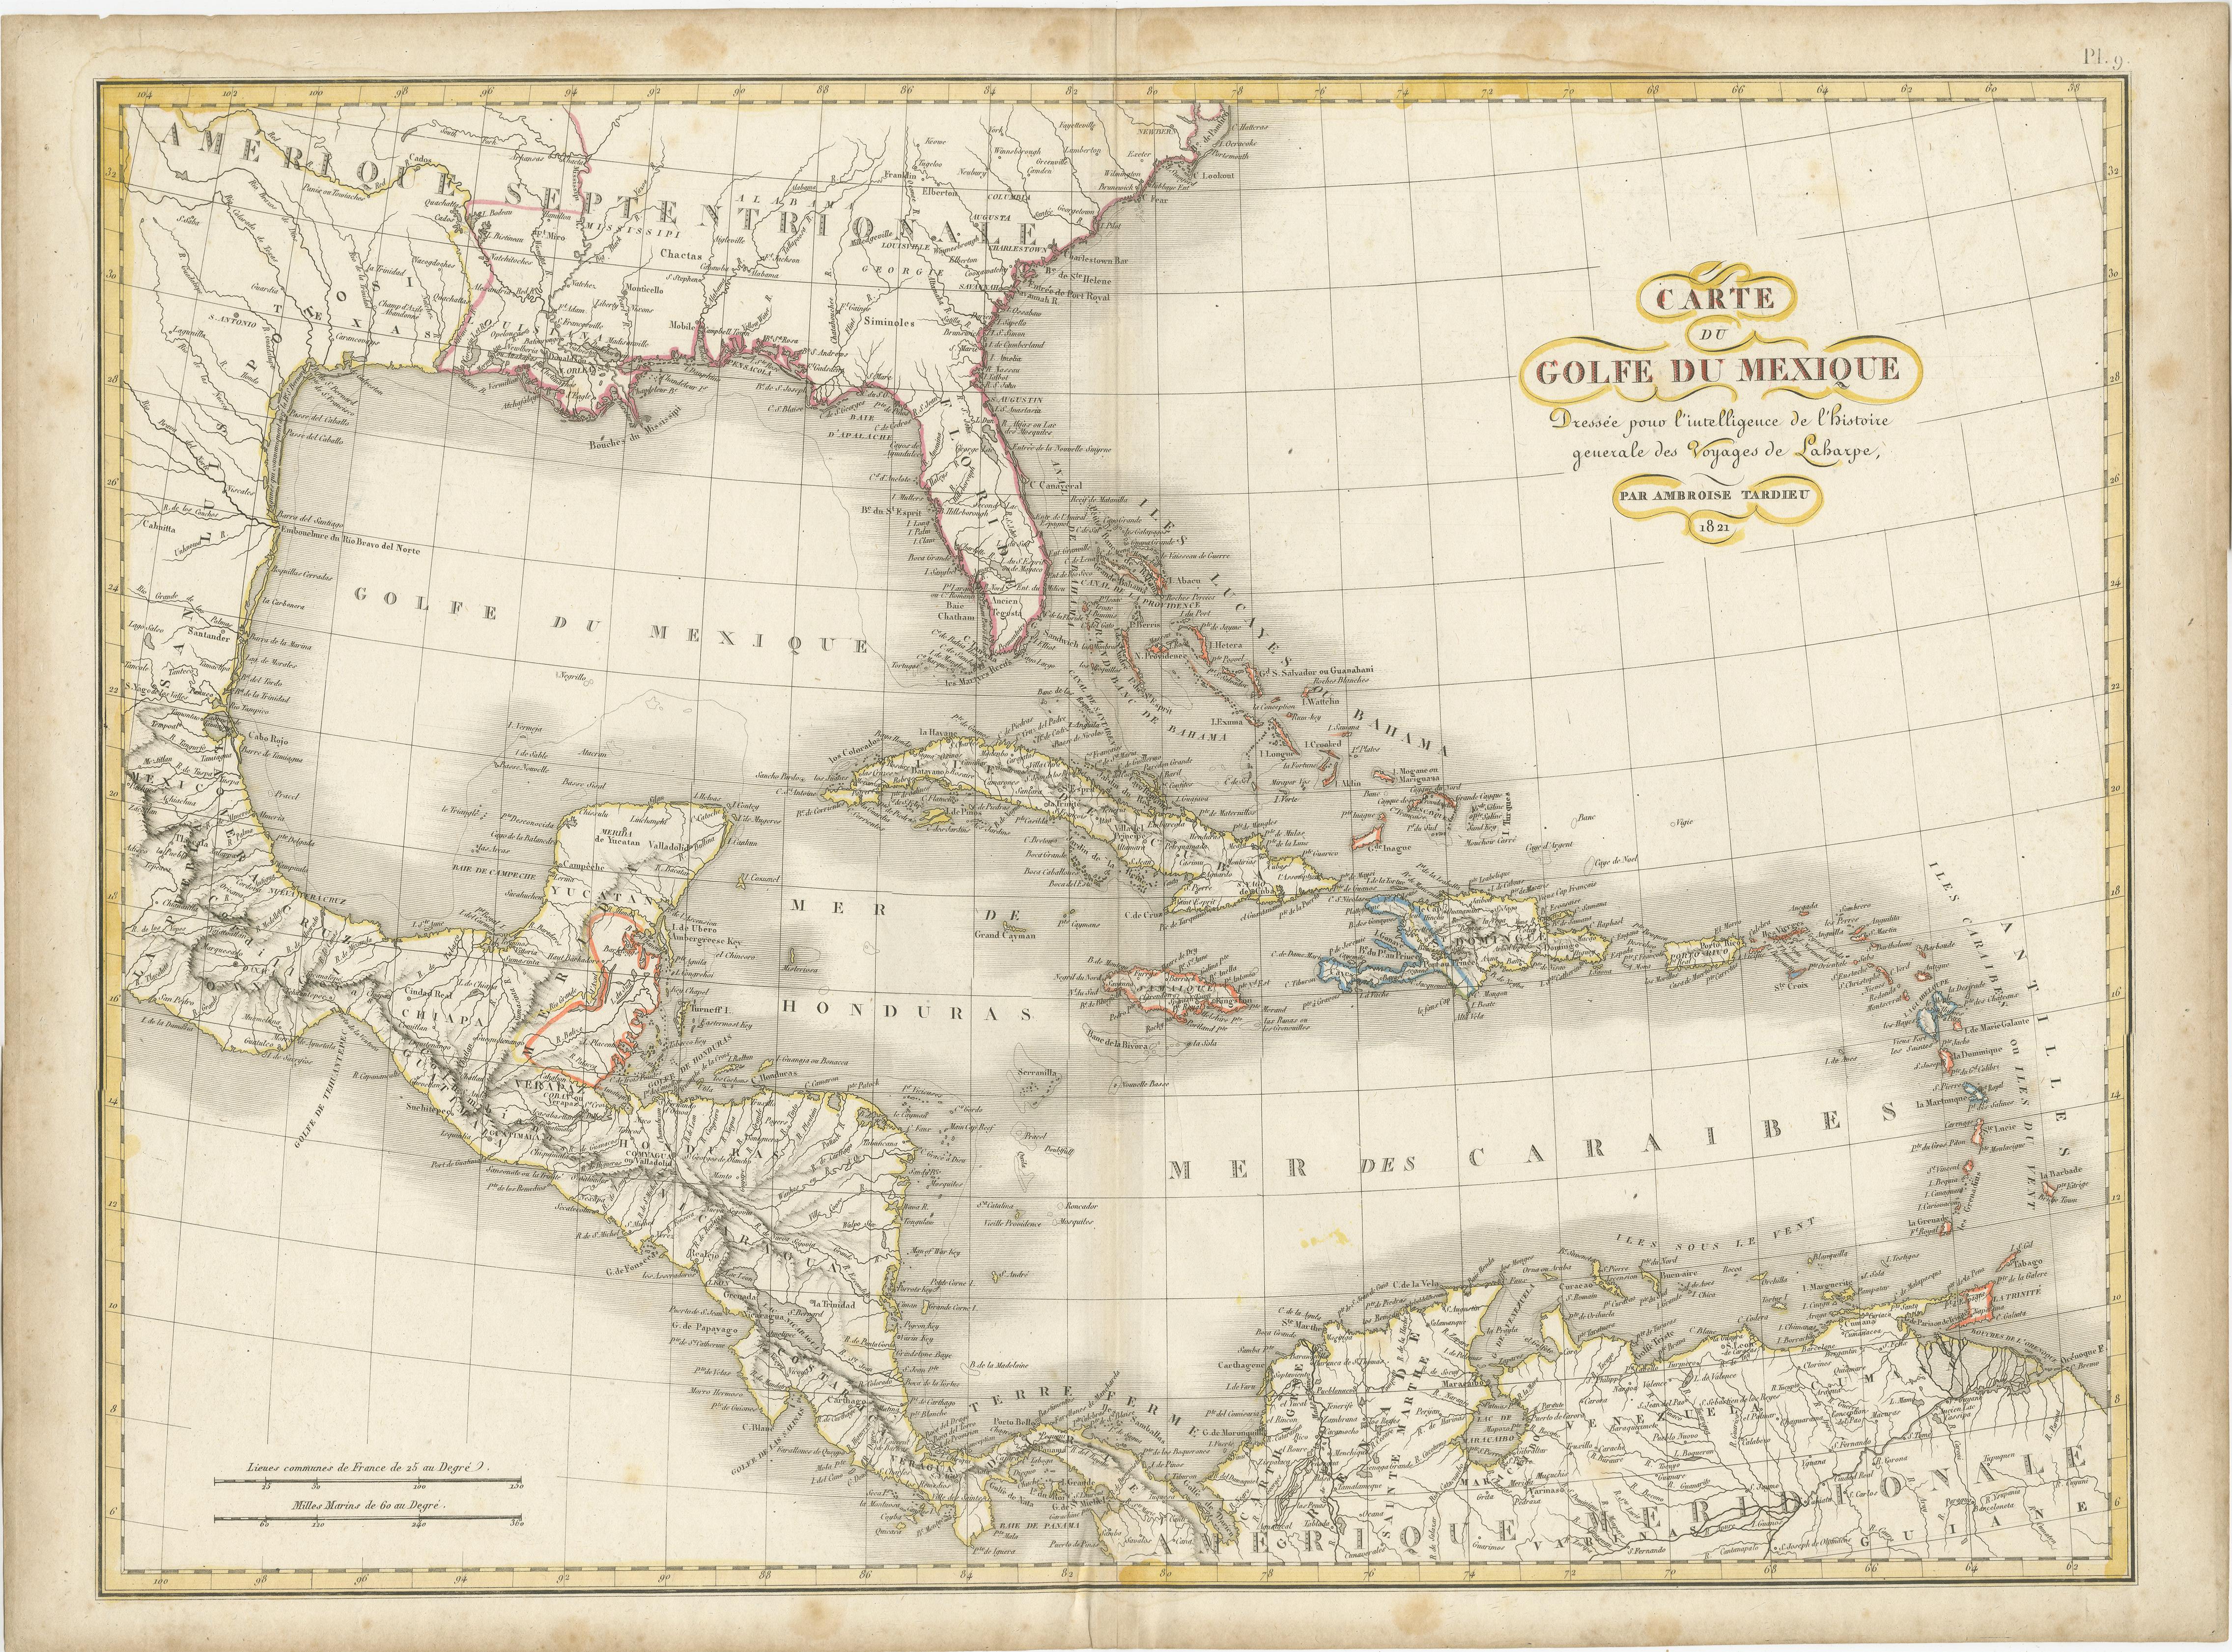 Antique map titled 'Carte du Golfe du Mexique'. This uncommon map depicts the Gulf of Mexico and all the islands of the West Indies. It also includes nice detail of the southern United States, Central America, and Northern South America. Place